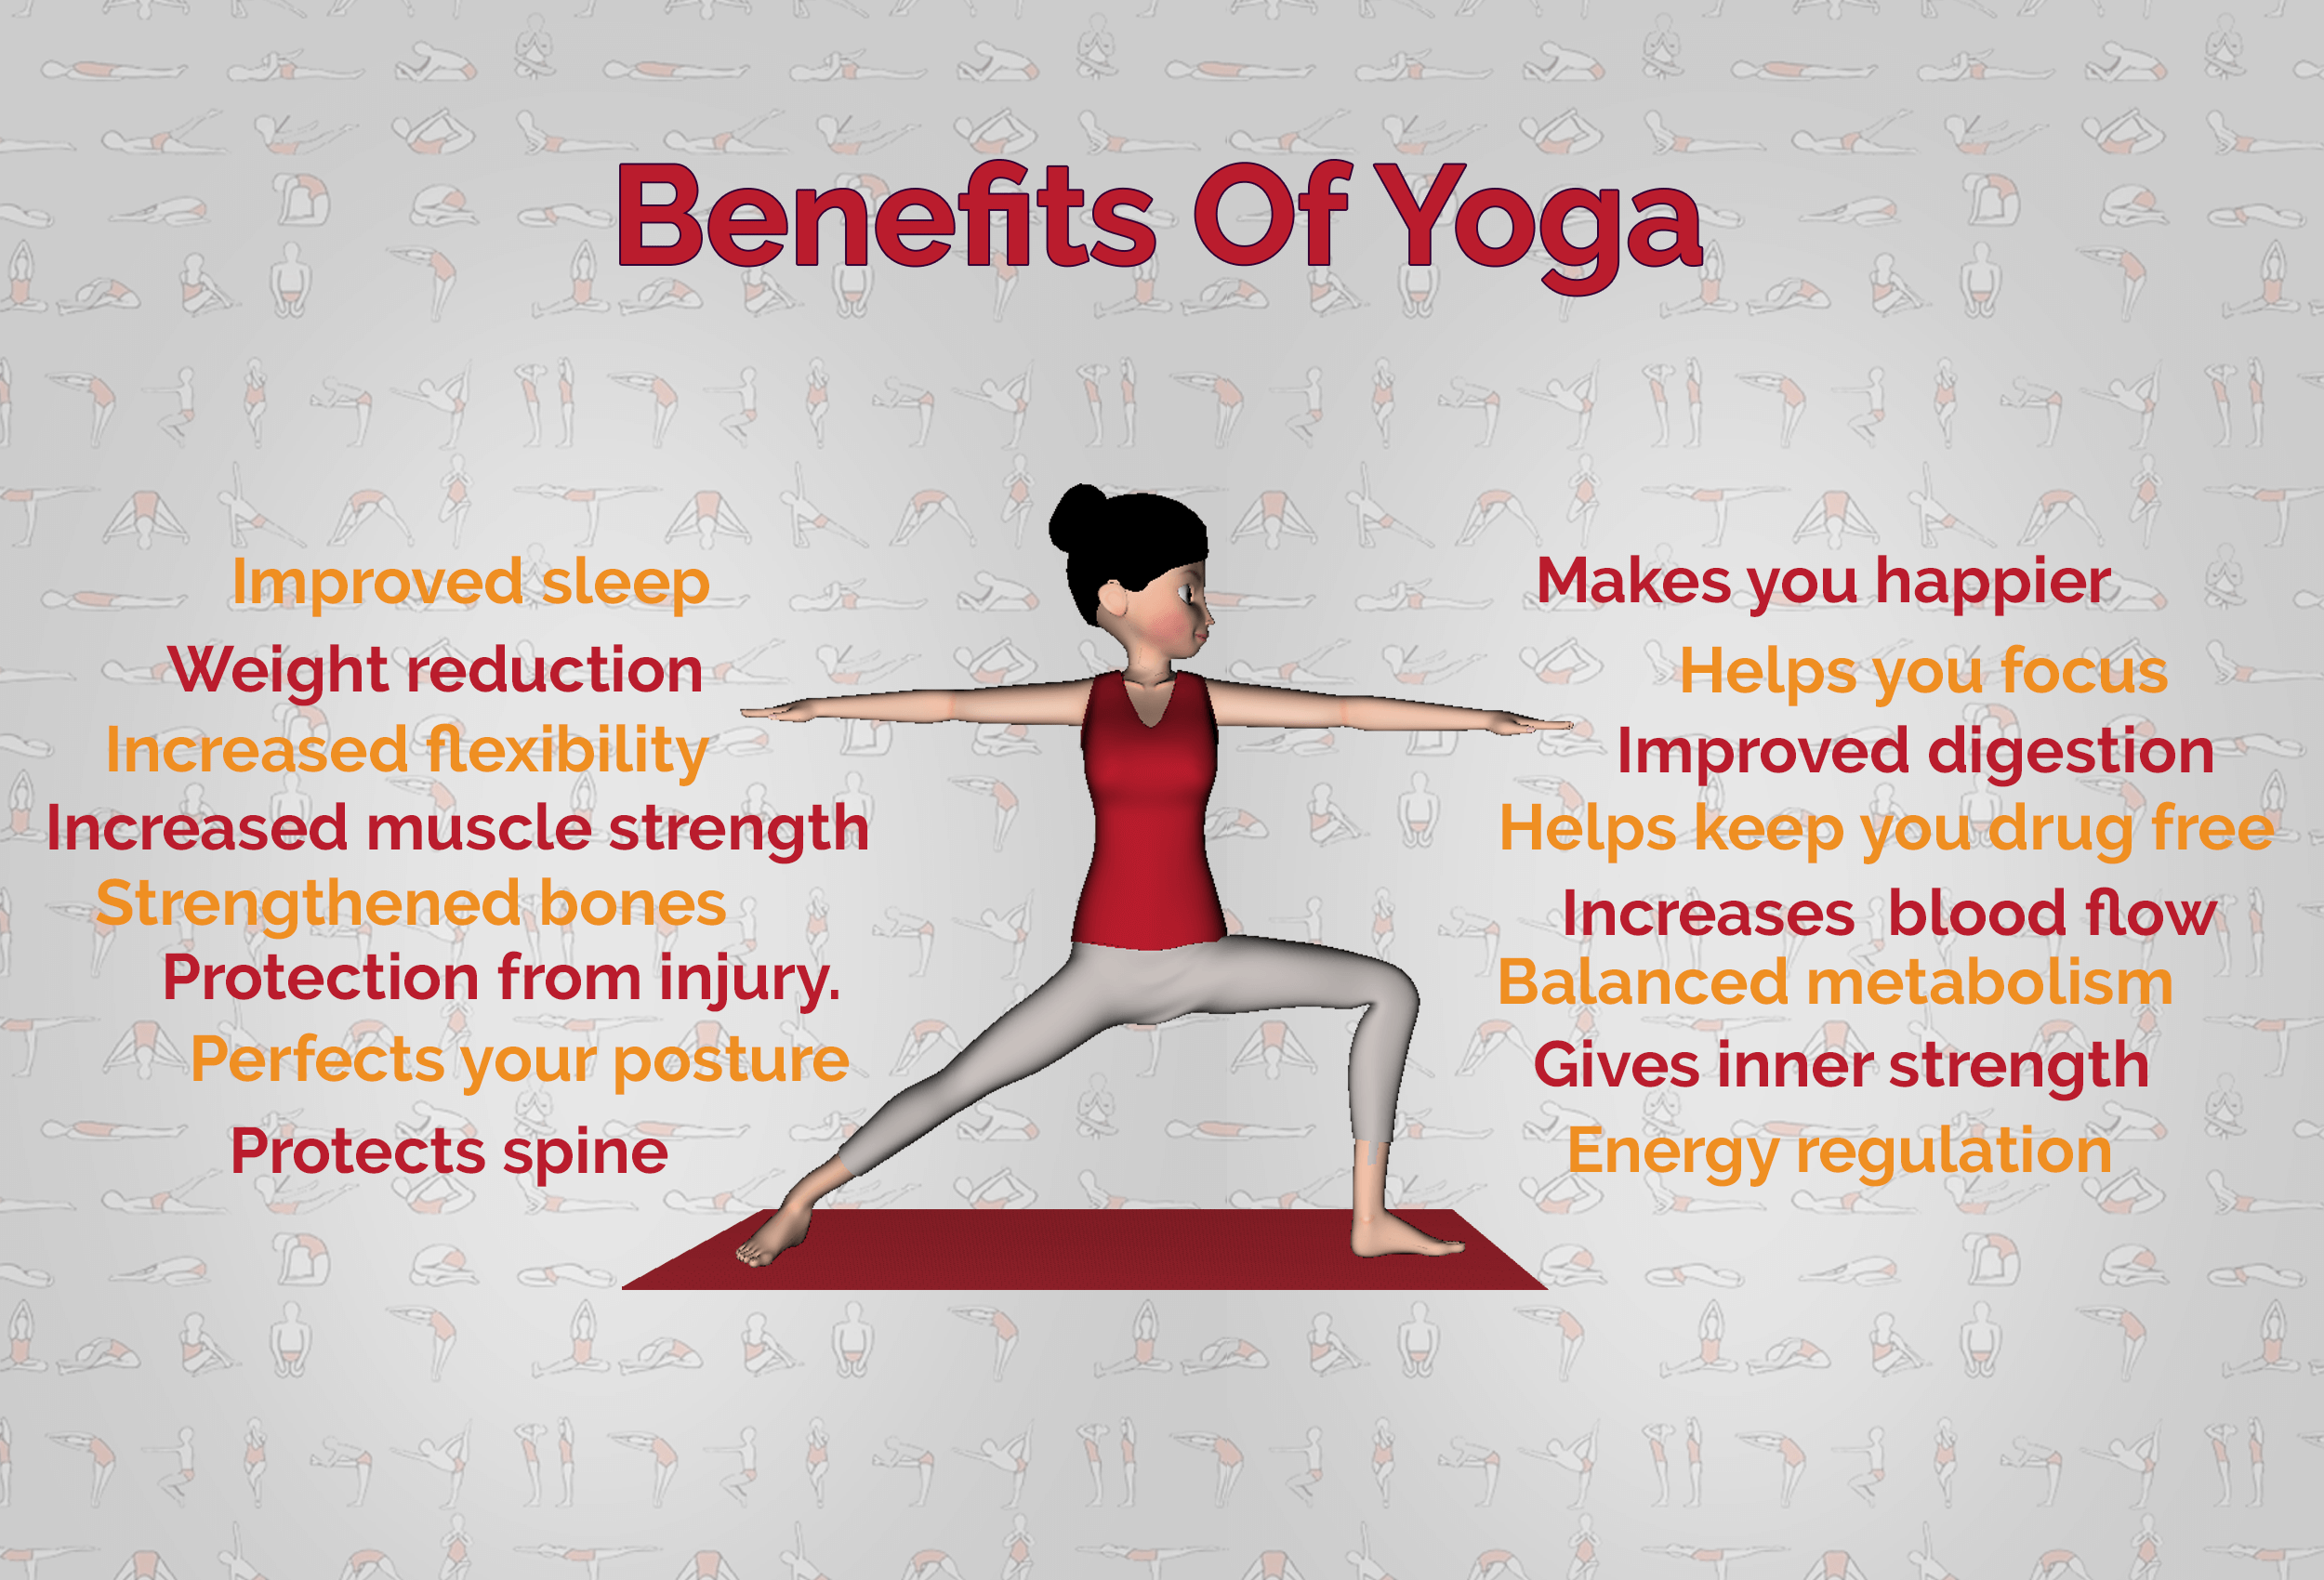 Learn About the Origins and Meaning of Vinyasa Yoga